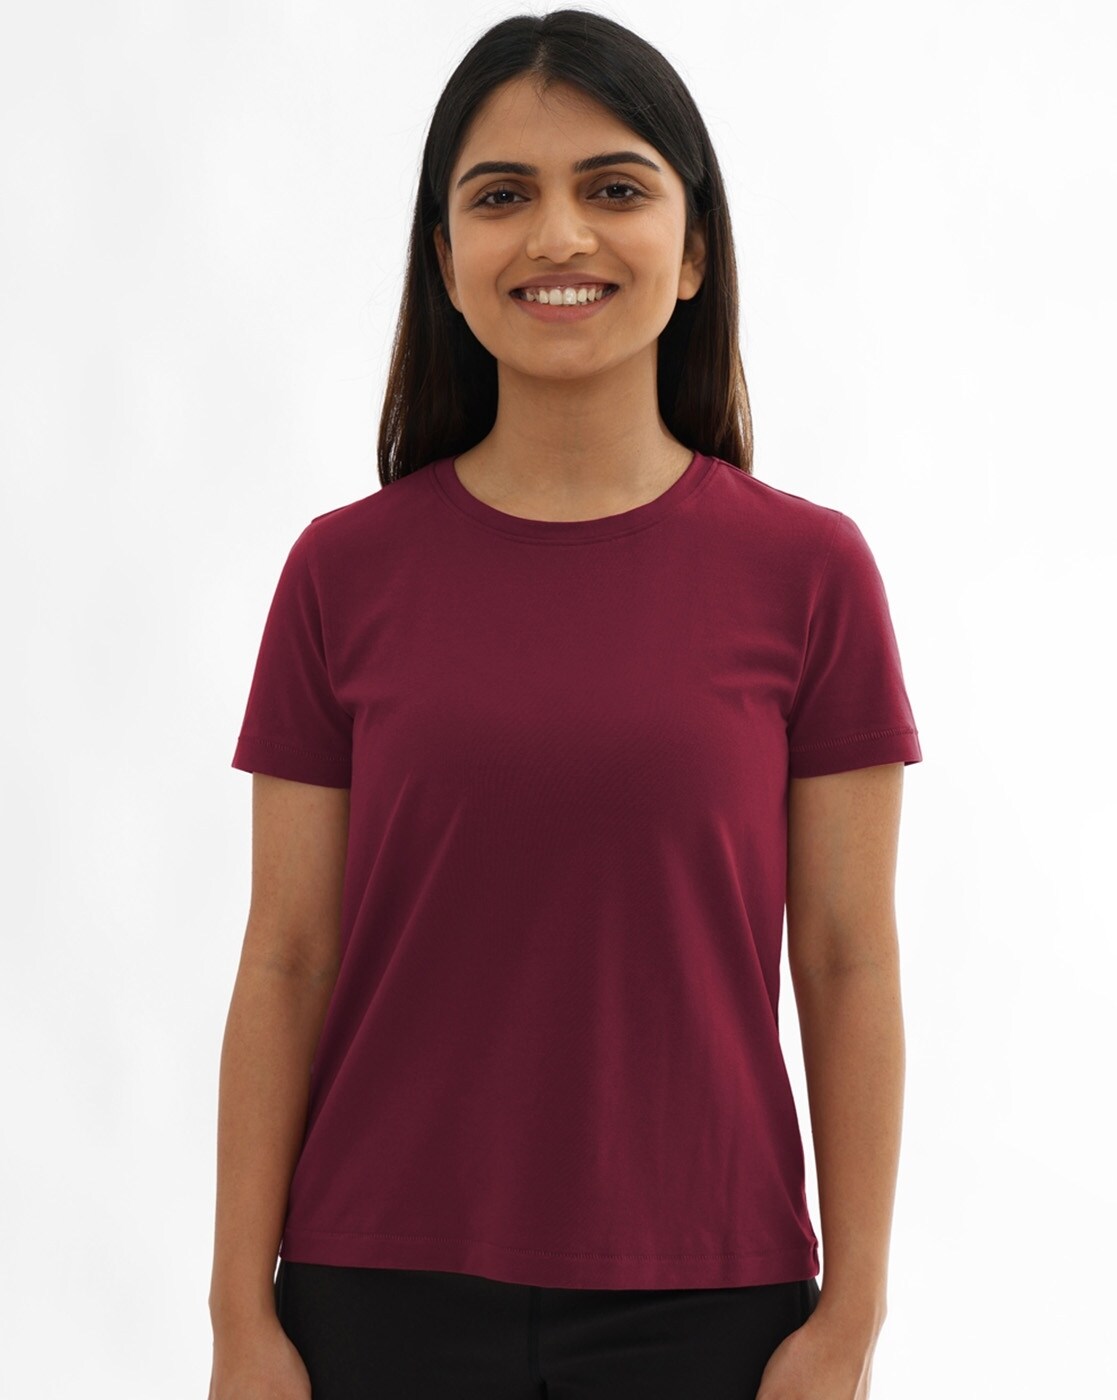 BlissClub Solid Women Round Neck White T-Shirt - Buy BlissClub Solid Women  Round Neck White T-Shirt Online at Best Prices in India